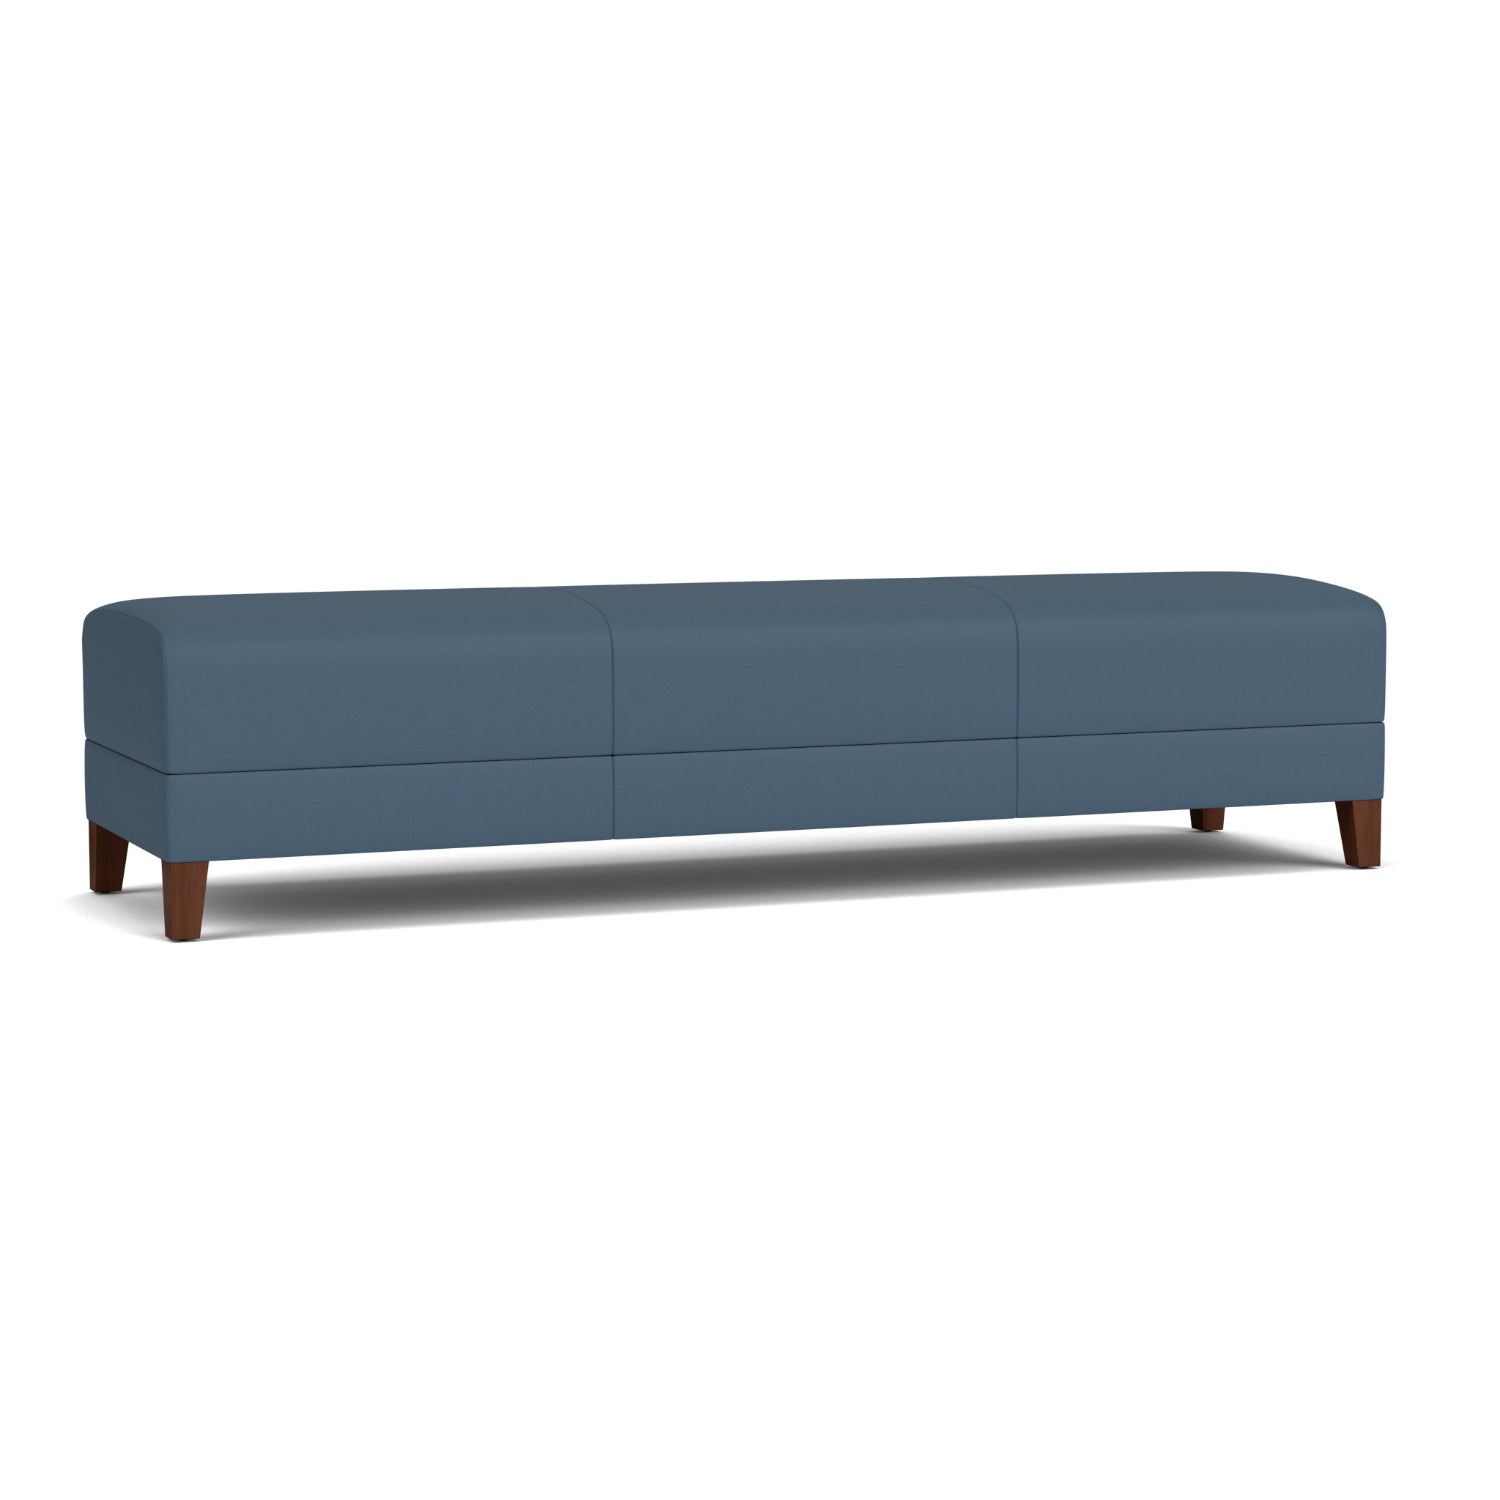 Fremont Collection Reception Seating, 3 Seat Bench, Standard Vinyl Upholstery, FREE SHIPPING